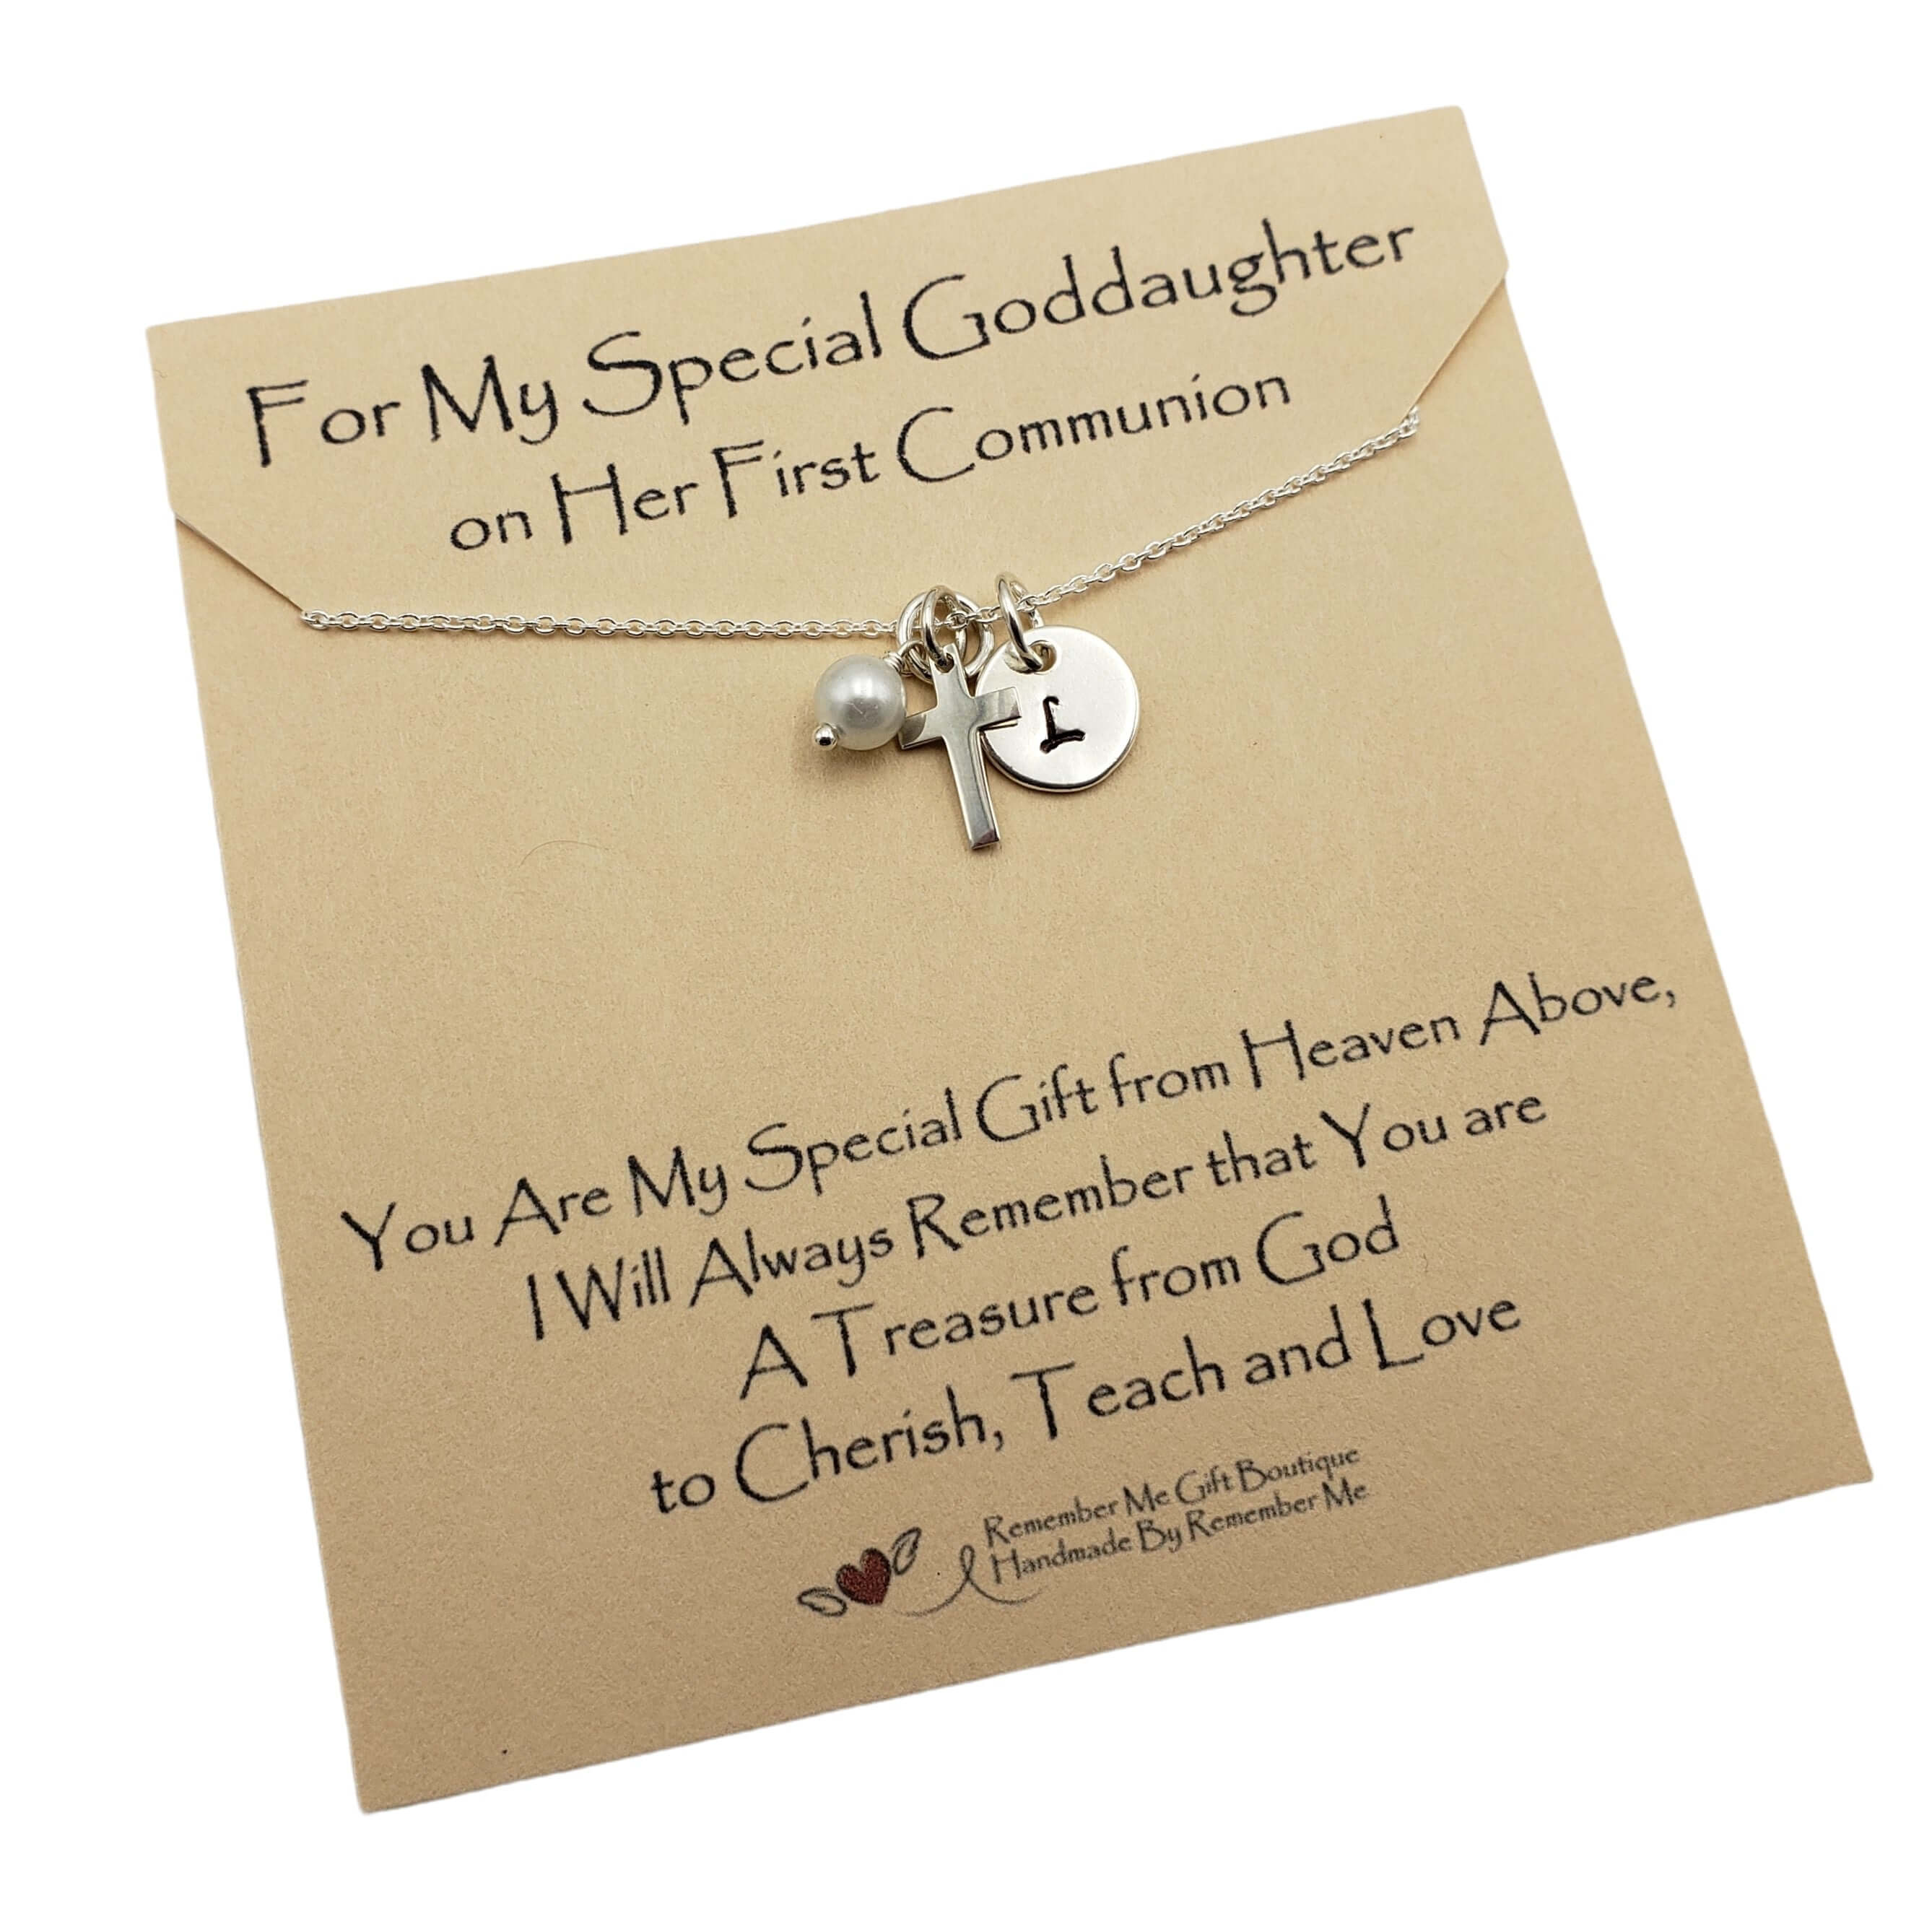 Gifts to give to the guests at a first communion